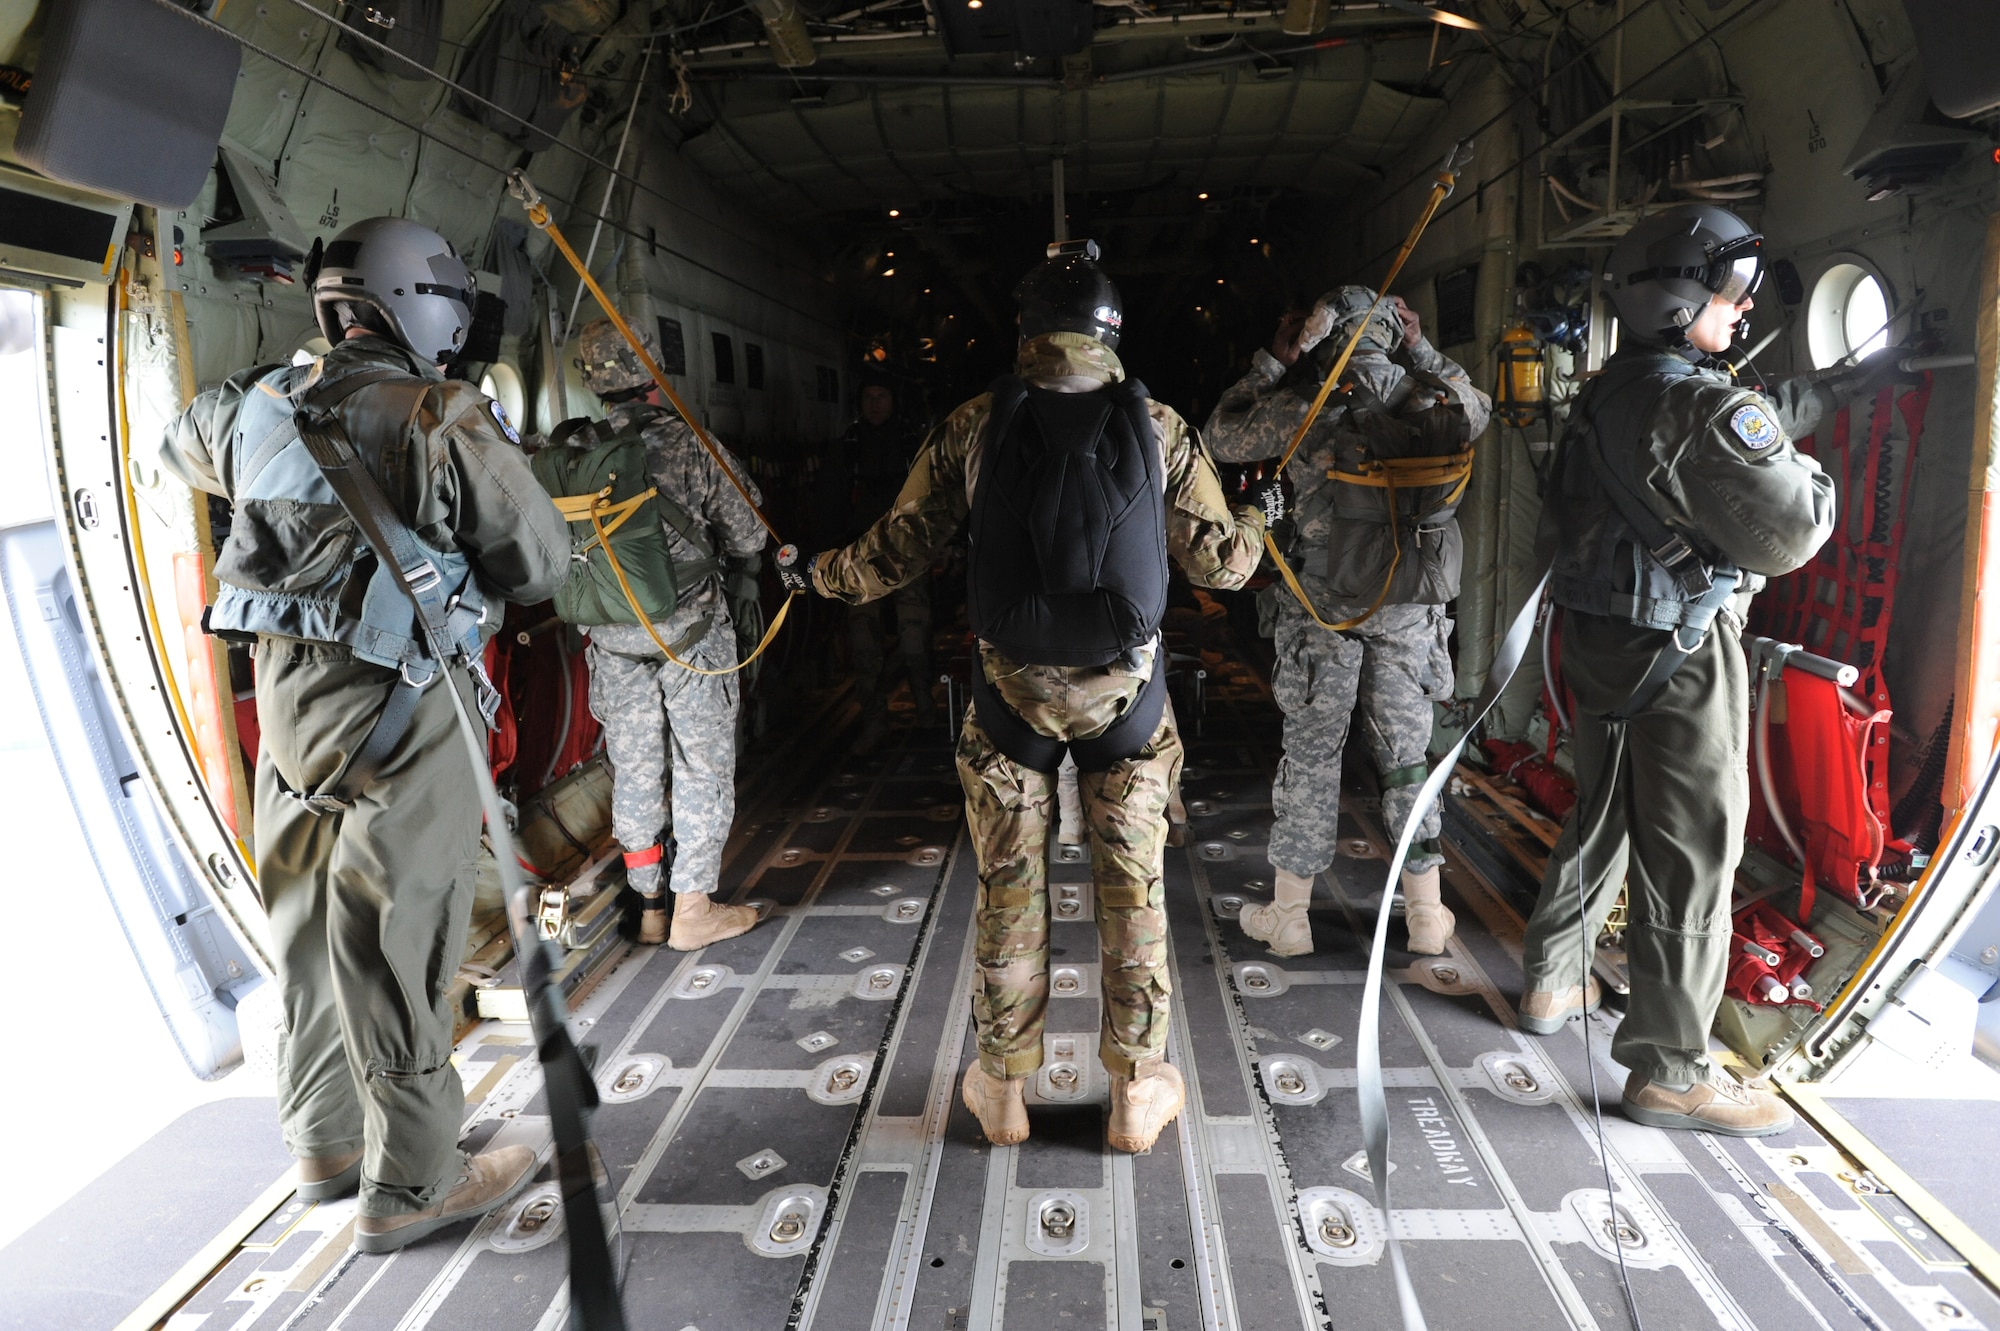 Members of diffrent military branches brace thenselves while inside an C-130J Super Hercules  during an off-station training in Zaragoza, Spain., Dec. 12, 2011. The OST consisted of a 90 member team and two aircraft, all assembled to enhance interoperability between U.S. and Spanish air forces as well as build partnerships between the two countries. (U.S. Air Force photo by Airman 1st Class Caitlin O'Neil-McKeown)